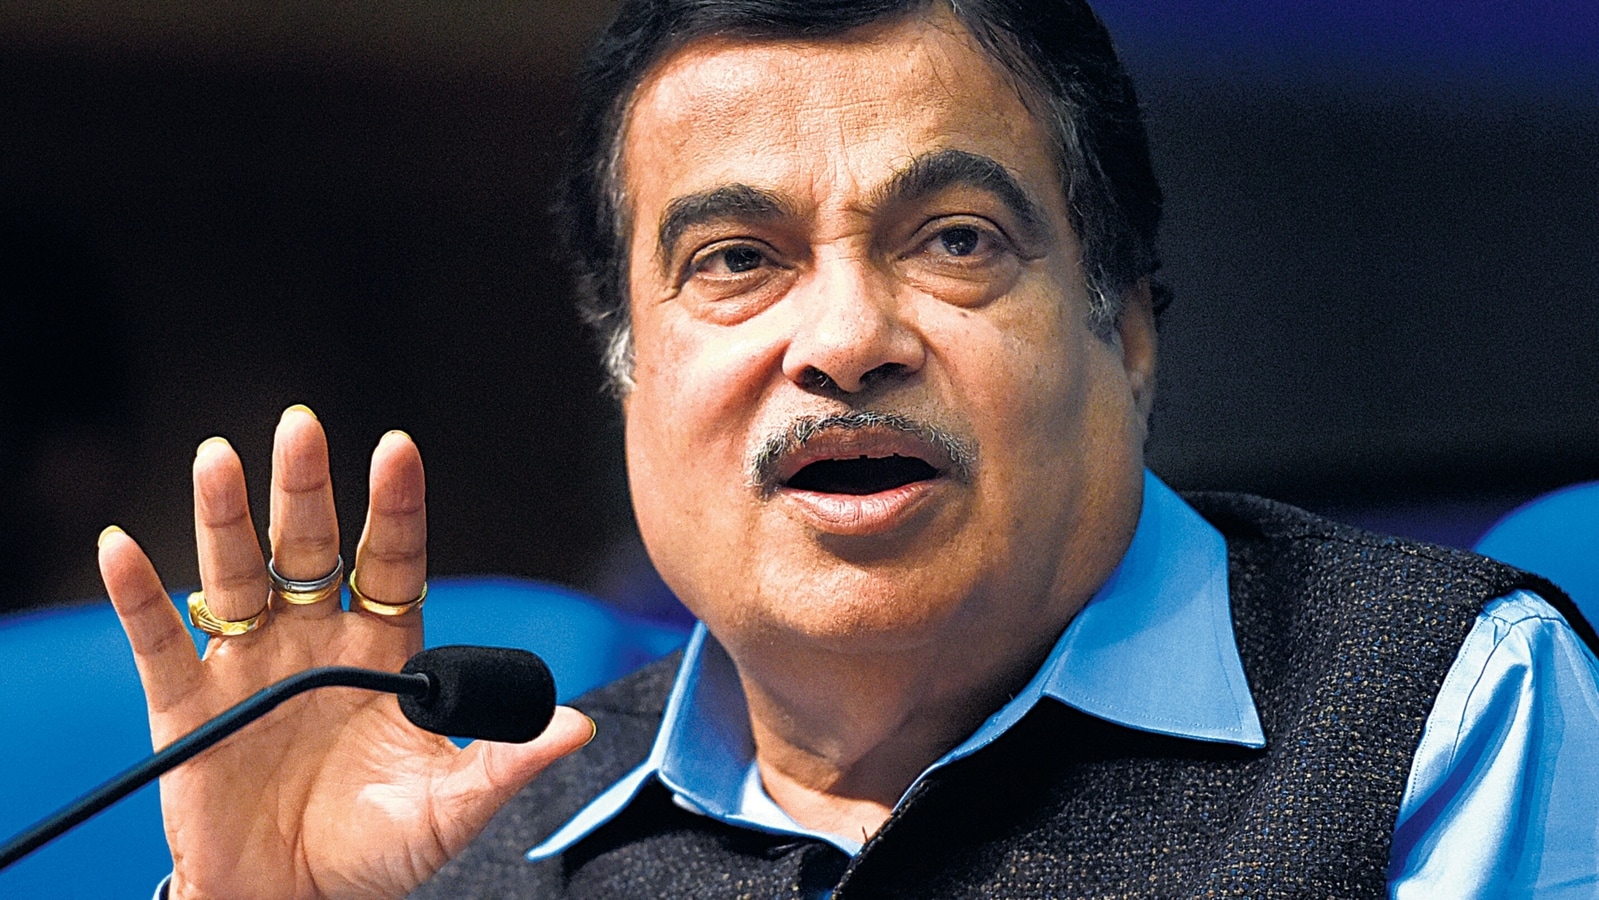 Union minister Nitin Gadkari pitches for investments from Tata ...